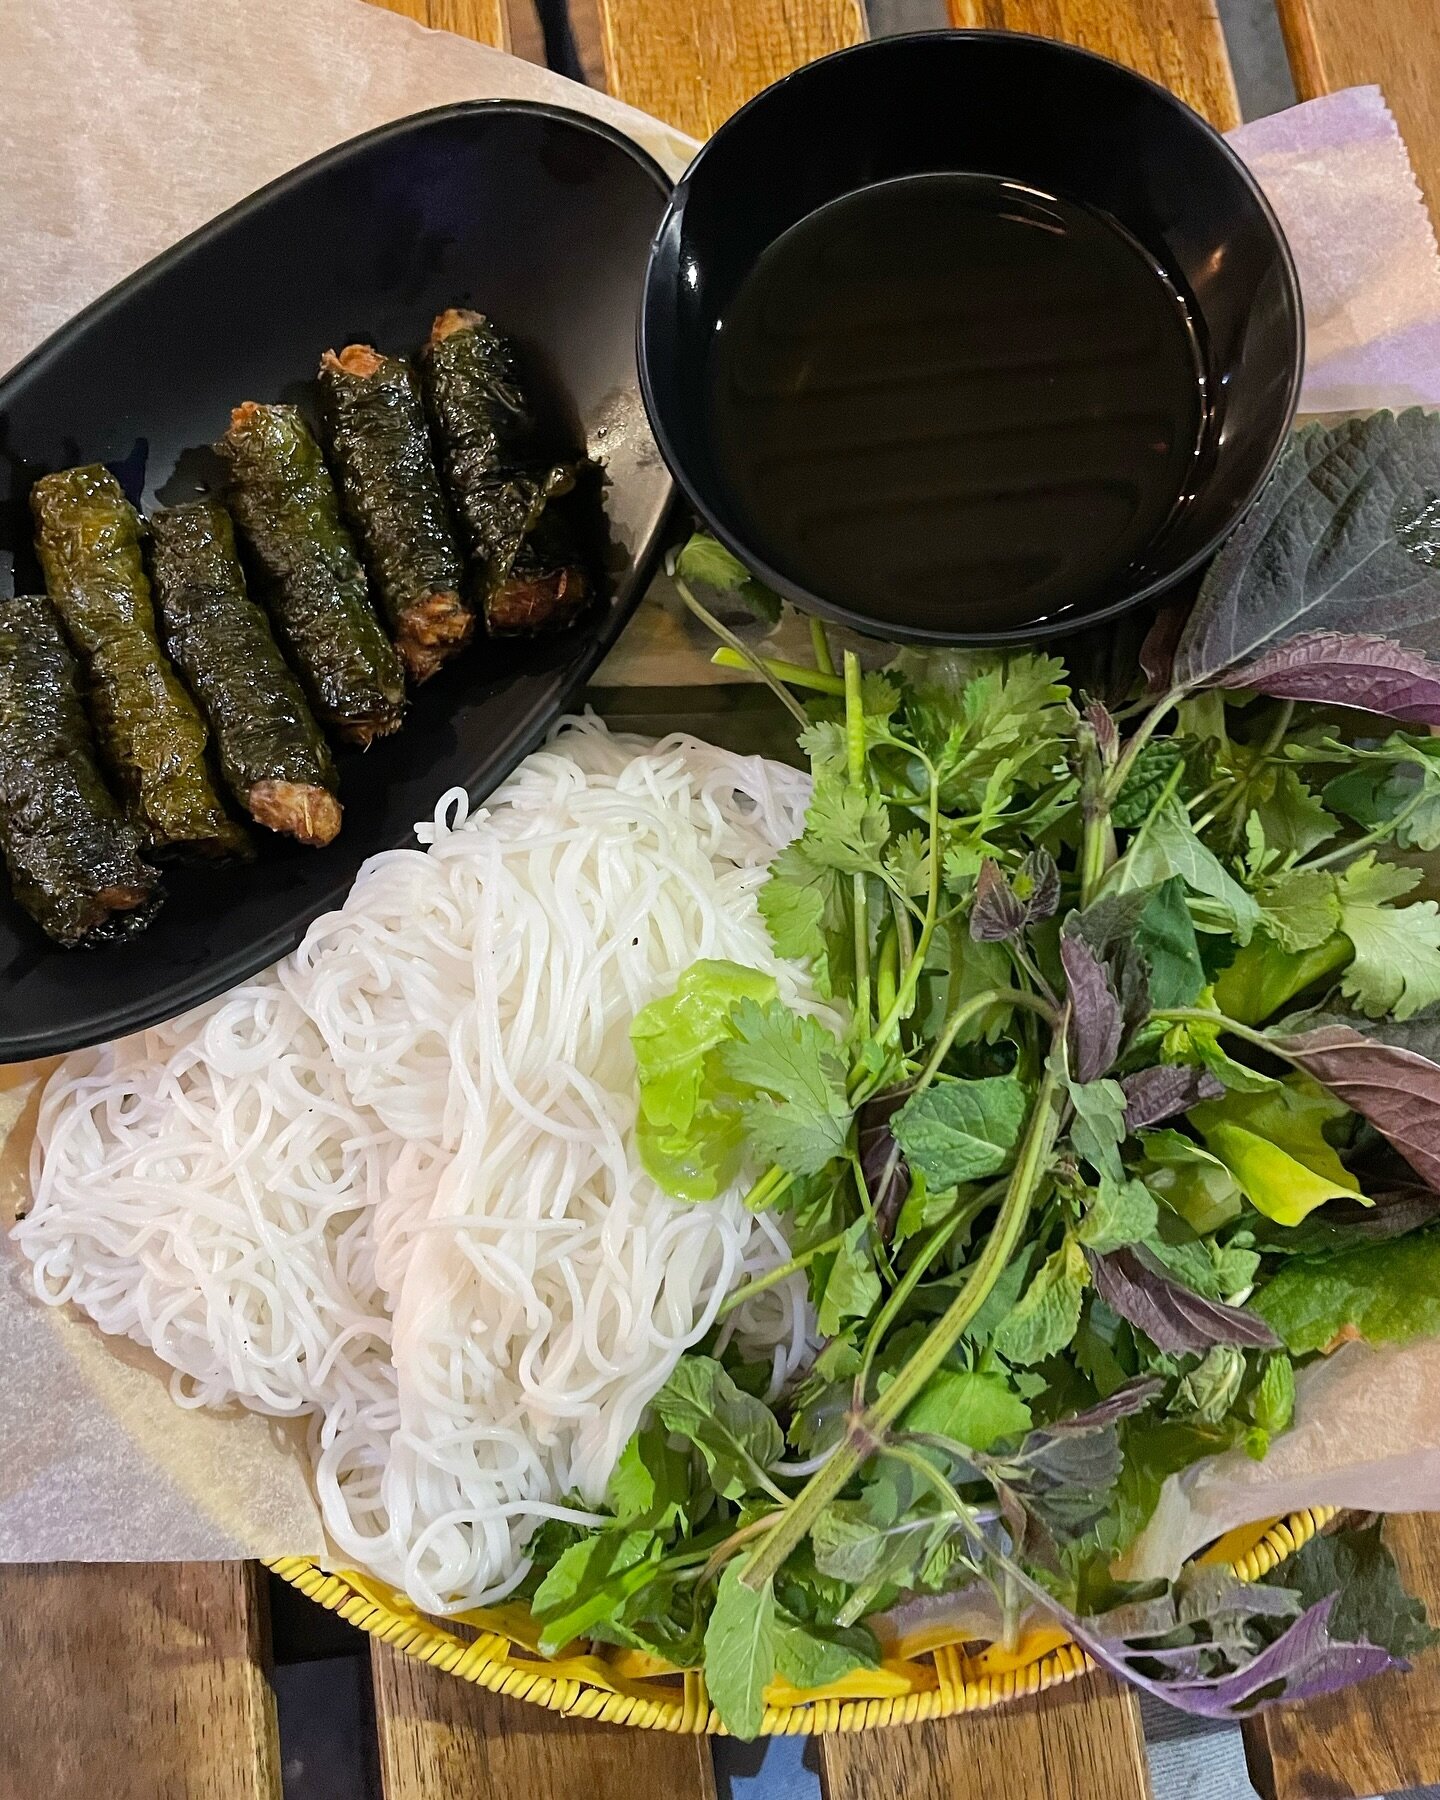 B&uacute;n b&ograve; l&aacute; lốt from @vnstreetfoodsss in Marrickville.

Grilled beef wrapped in betel leaves is one of the best things I ate when I visited Hoi An in Vietnam. VN Street Foods&rsquo; version brought back all those happy memories. Th